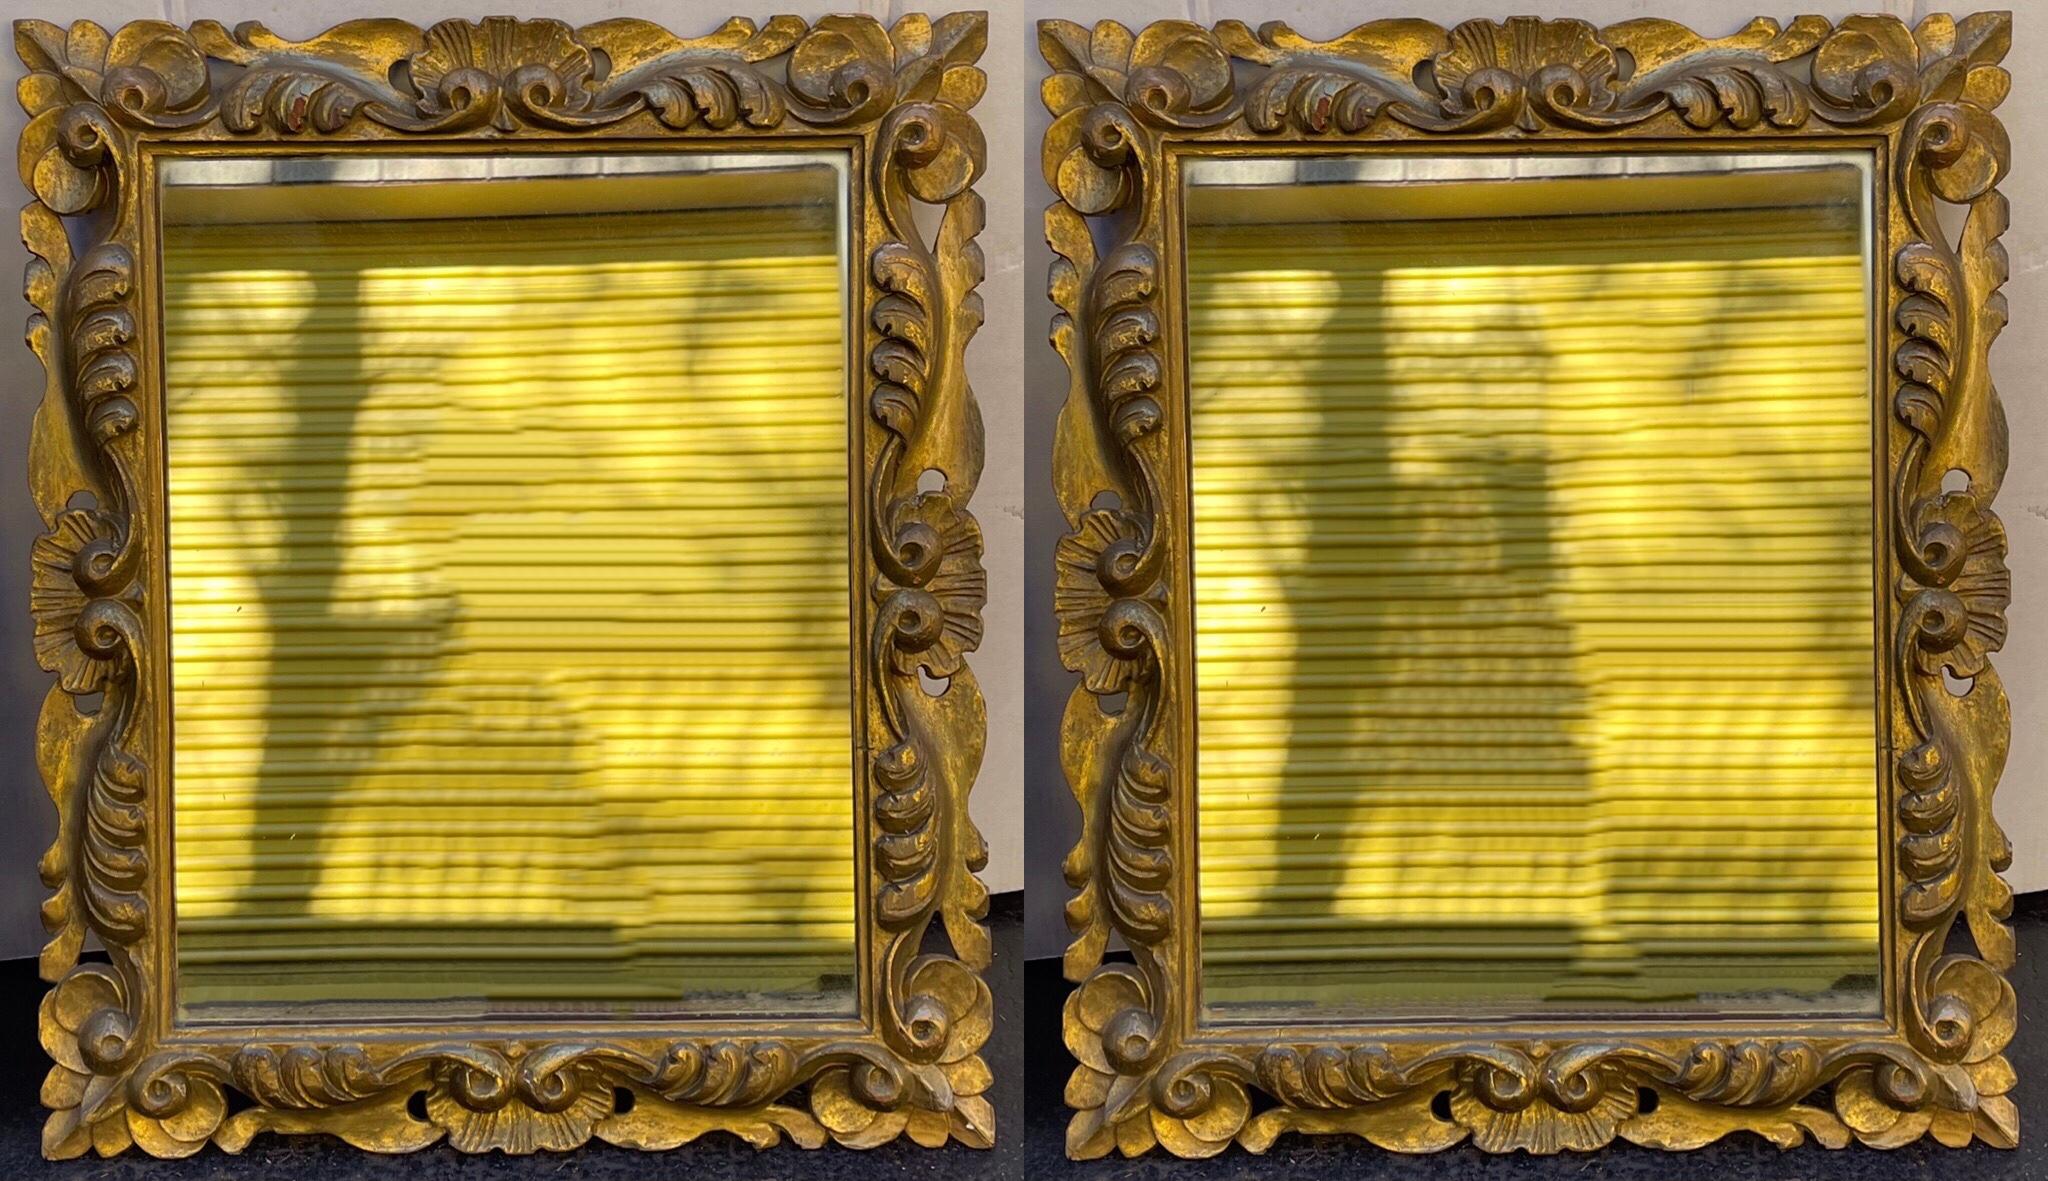 19th Century French Rococo Revival Carved Giltwood Mirrors, Pair For Sale 3